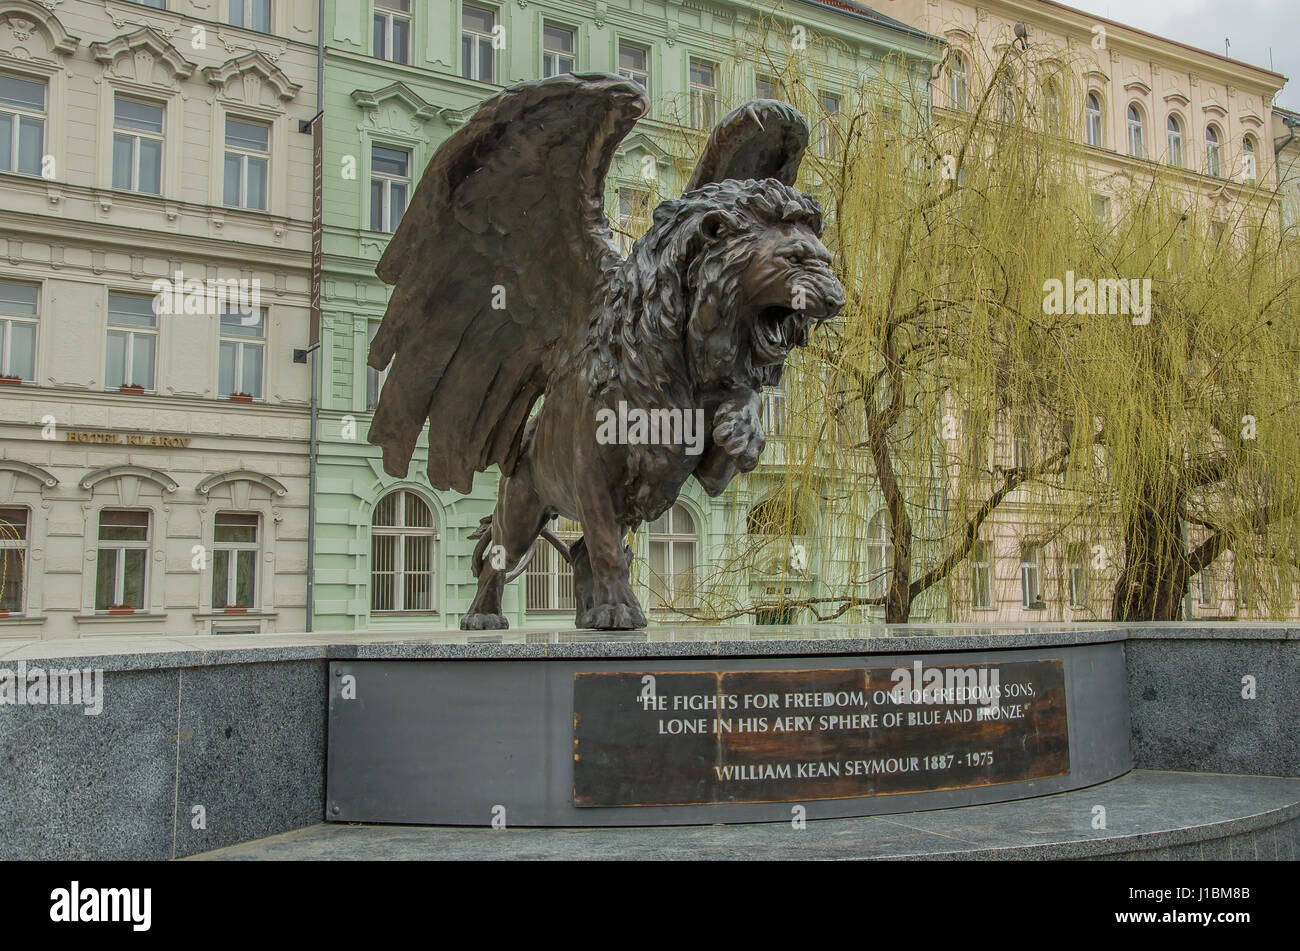 The Winged Lion Memorial was unveiled on 17 June 2014 at Klárov in Prague by the British Member of Parliament, Rt Hon Sir Nicholas Soames MP. Stock Photo